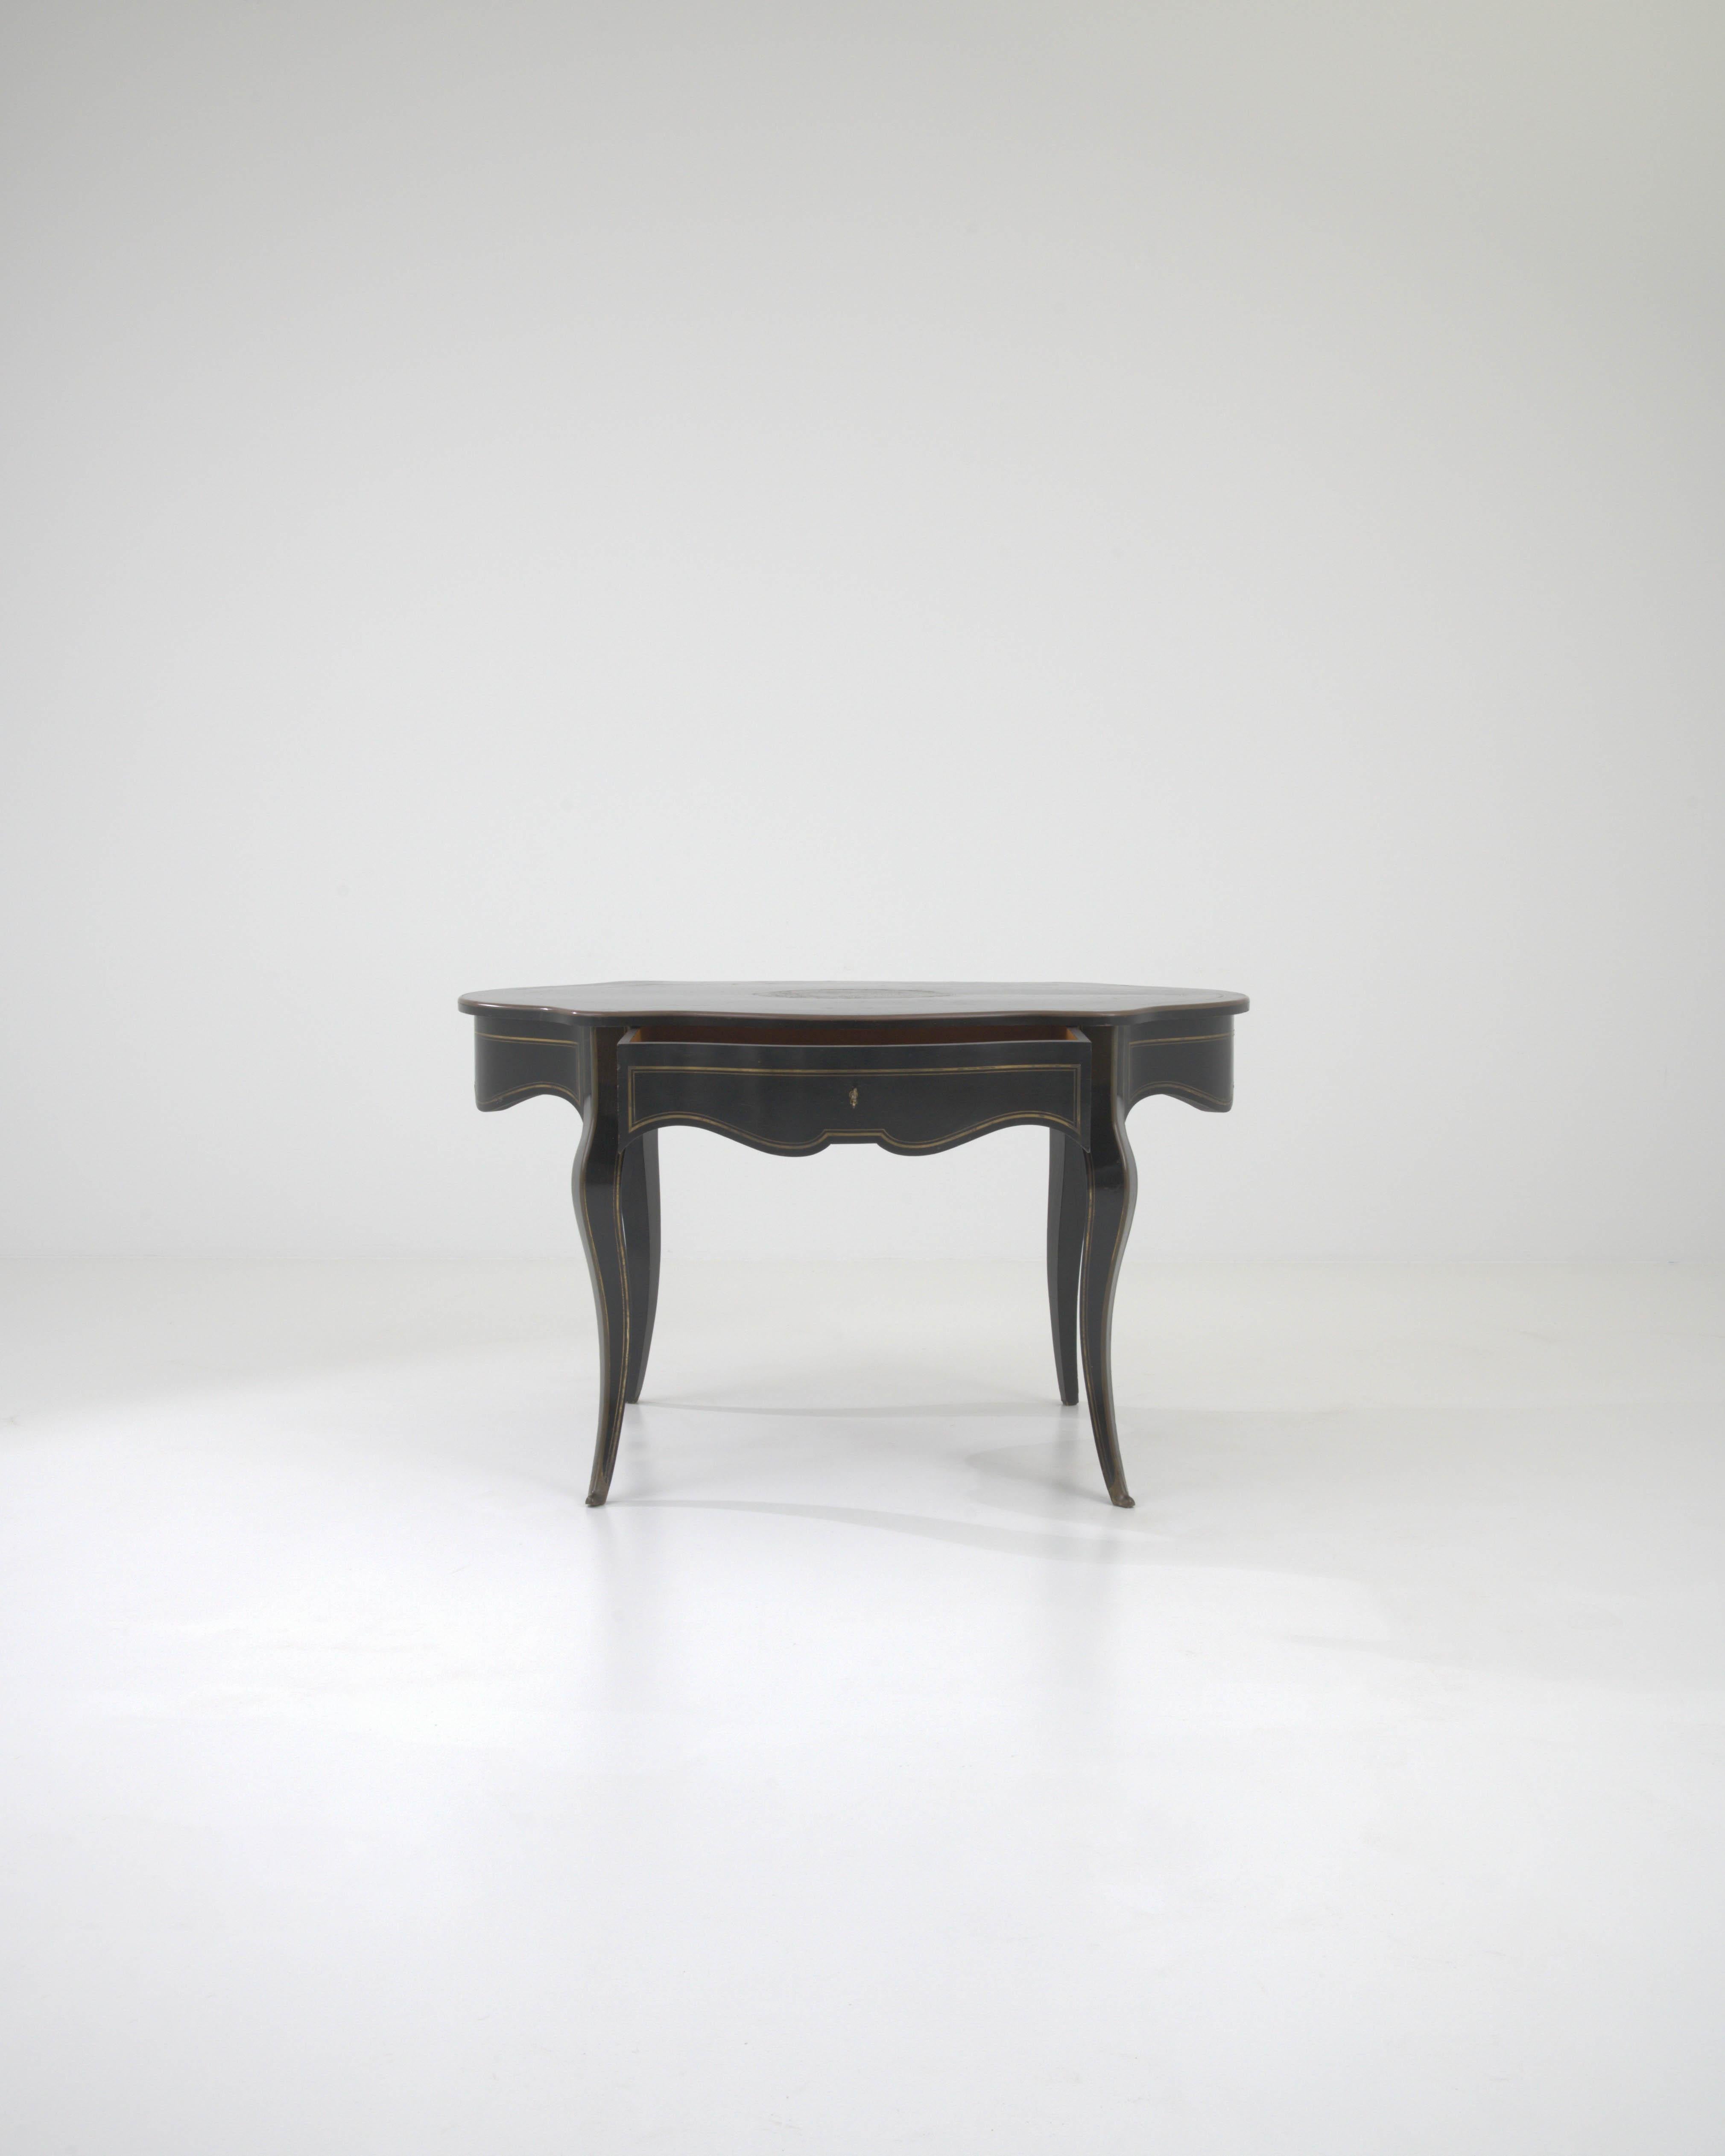 Step into the 19th century with this exquisite French Wooden Side Table featuring its original patina. The elegant black table boasts a scalloped apron that gracefully encircles the entire piece, creating a charming visual appeal. The oval top,